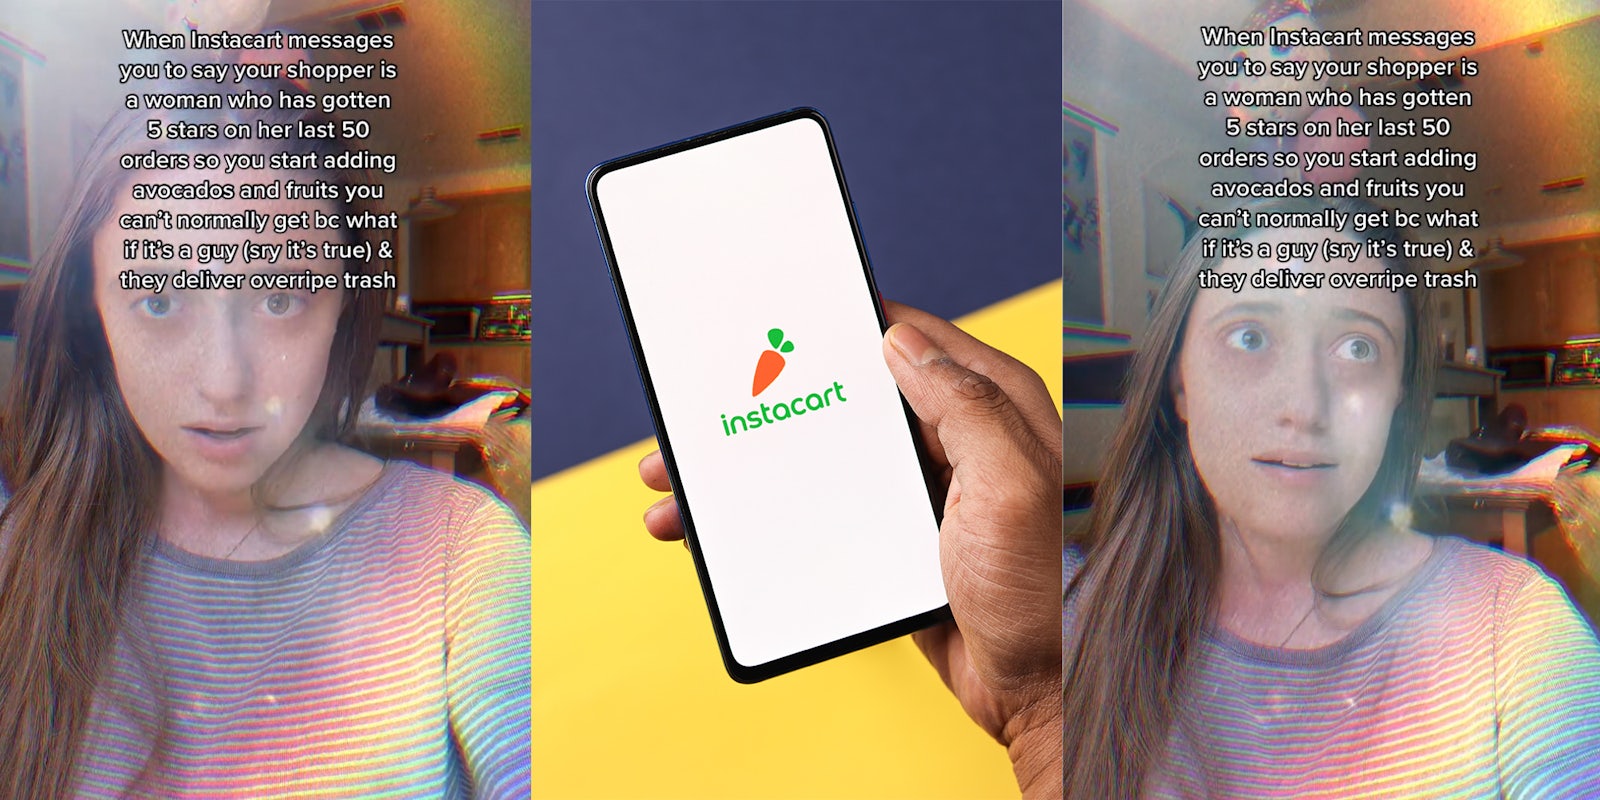 Woman showing gratitude for getting a woman shopper on her Instacart app. Instacart logo on phone screen stock image.